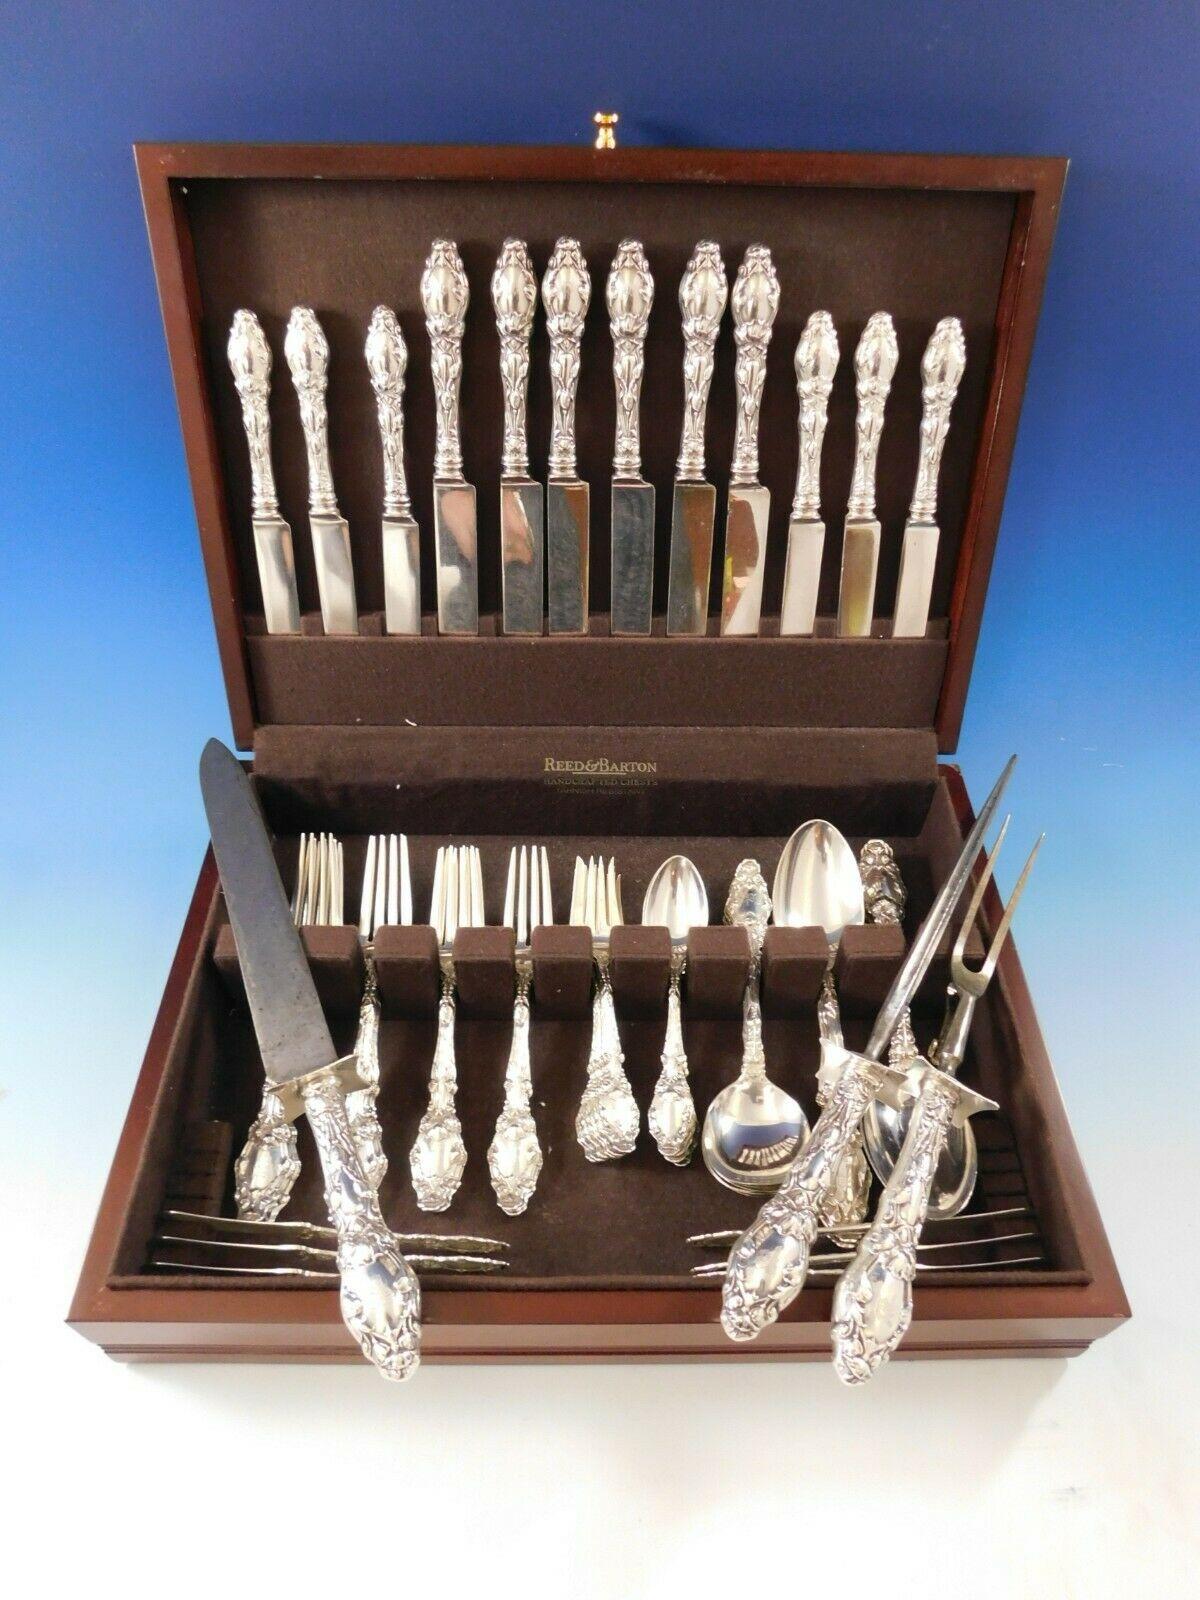 Stunning Virginiana by Gorham sterling silver Art Nouveau flatware set, 57 pieces. This set includes:

6 dinner size knives, blunt-plated blades, 9 5/8